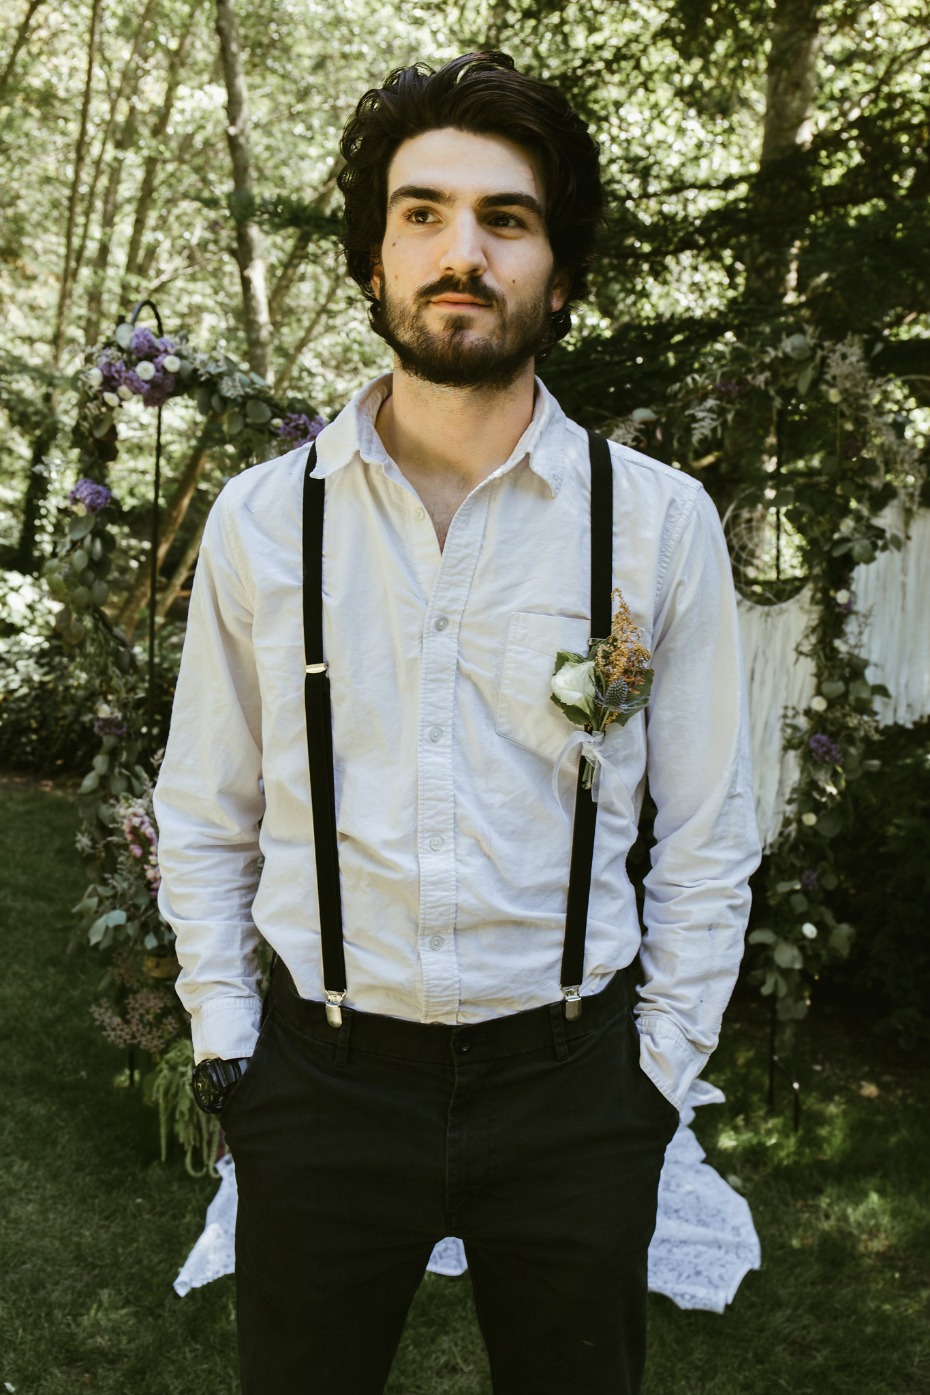 Laid-back look for the groom